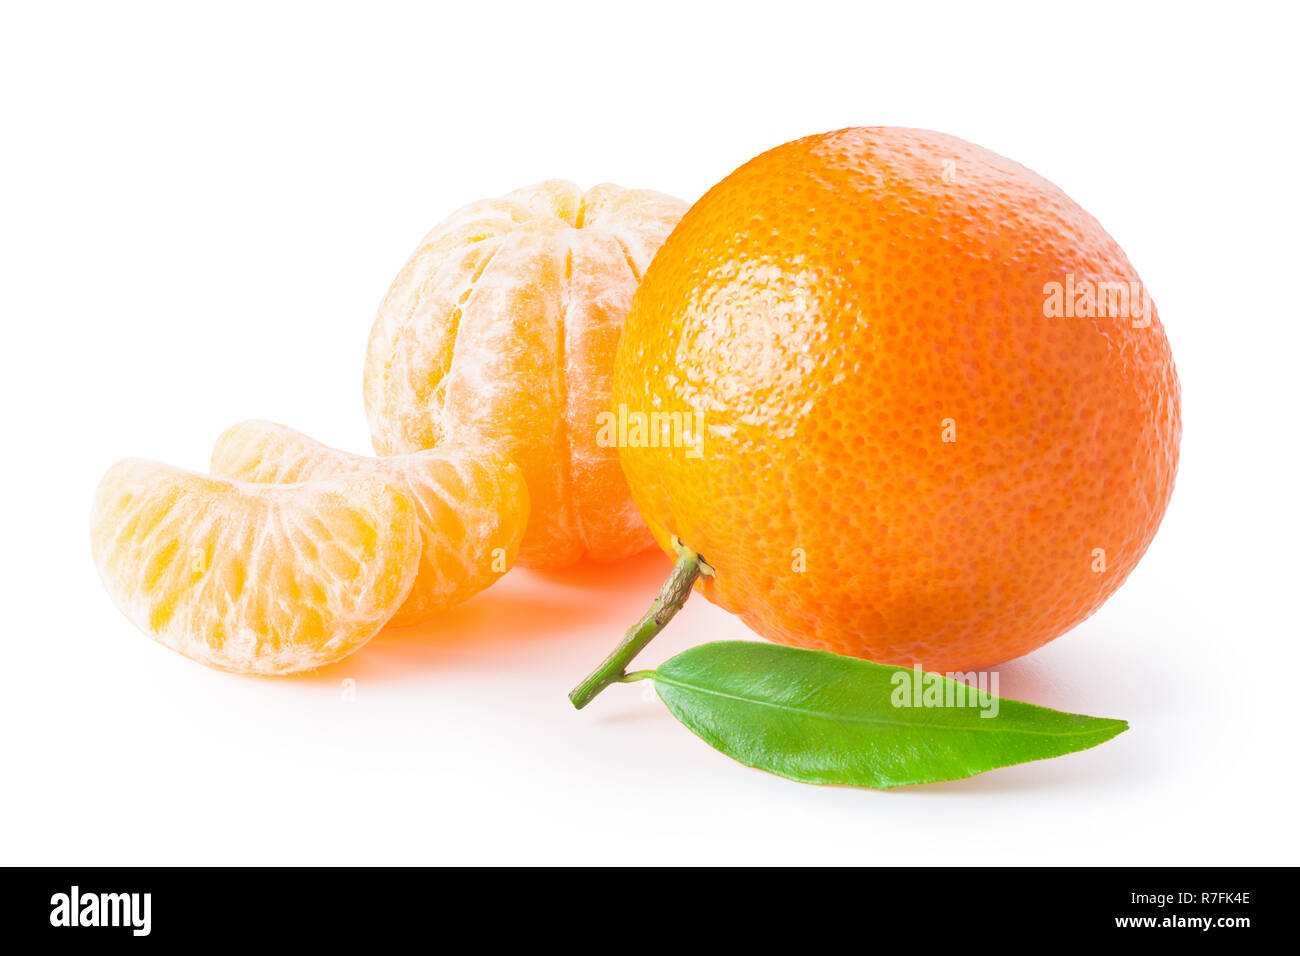 https://c8.alamy.com/comp/R7FK4E/tangerine-or-clementine-with-green-leaf-and-slices-isolated-on-white-background-R7FK4E.jpg